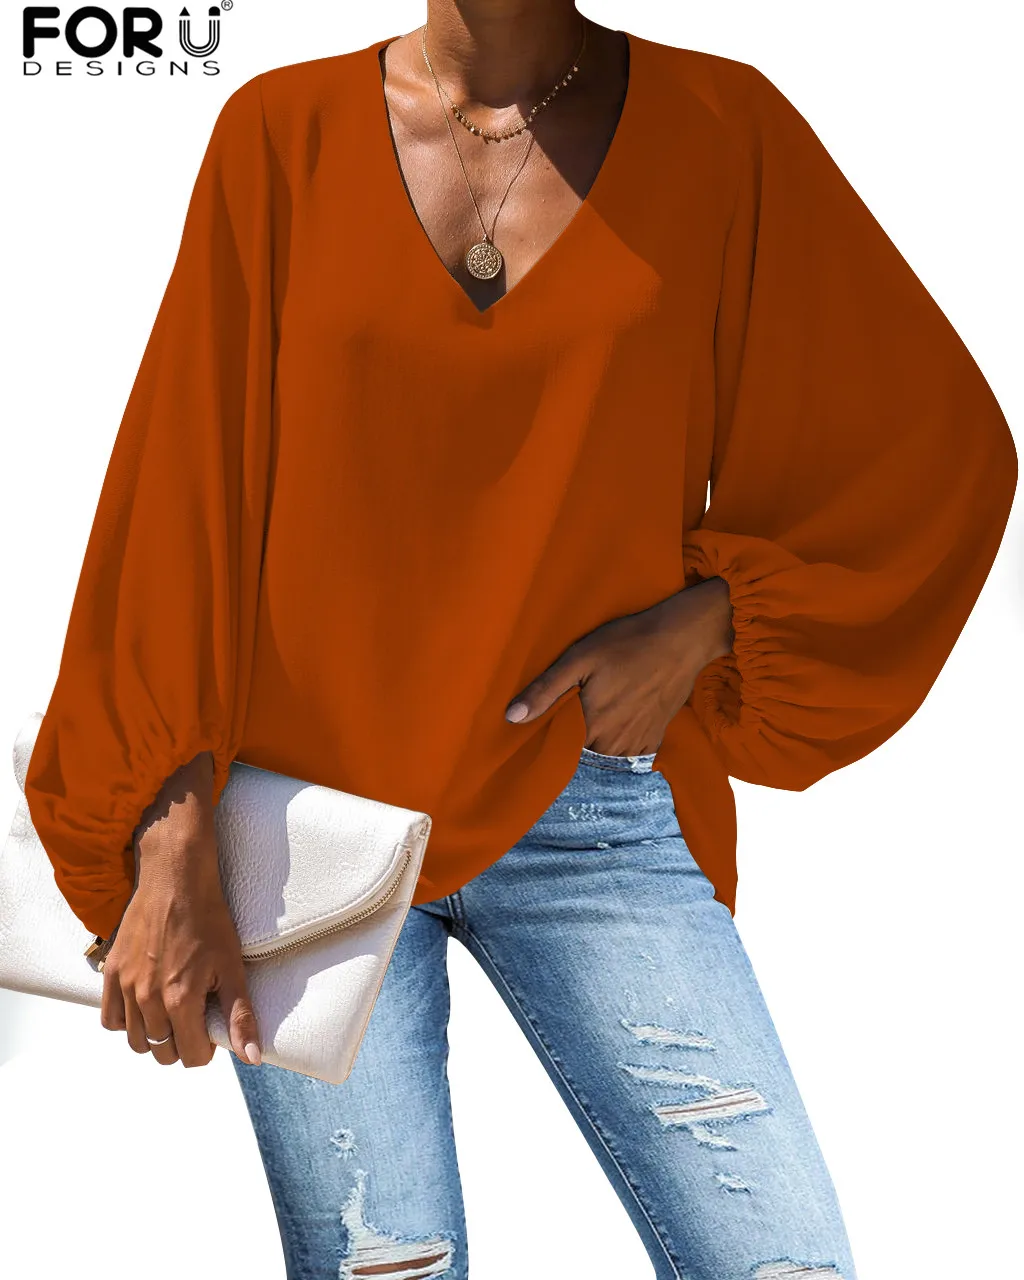 FORUDESIGNS Solid Color Full Sleeve Chiffon Shirt Summer Autumn Full Sleeve Blouse Breathable Clothes Black/Red/Gray V Neck Tops 15